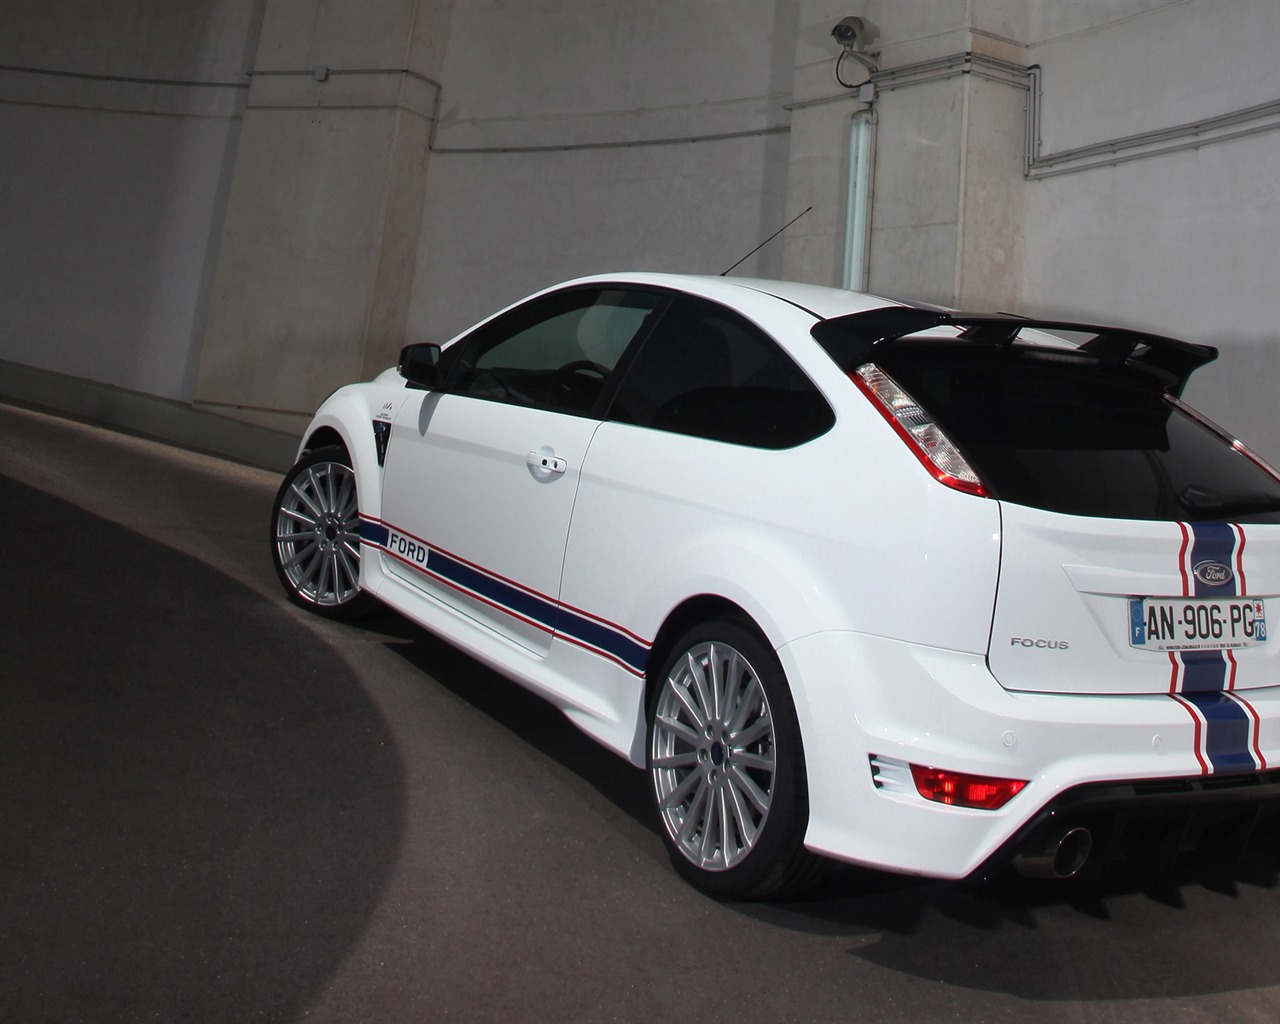 Ford Focus RS Le Mans Classic - 2010 福特8 - 1280x1024